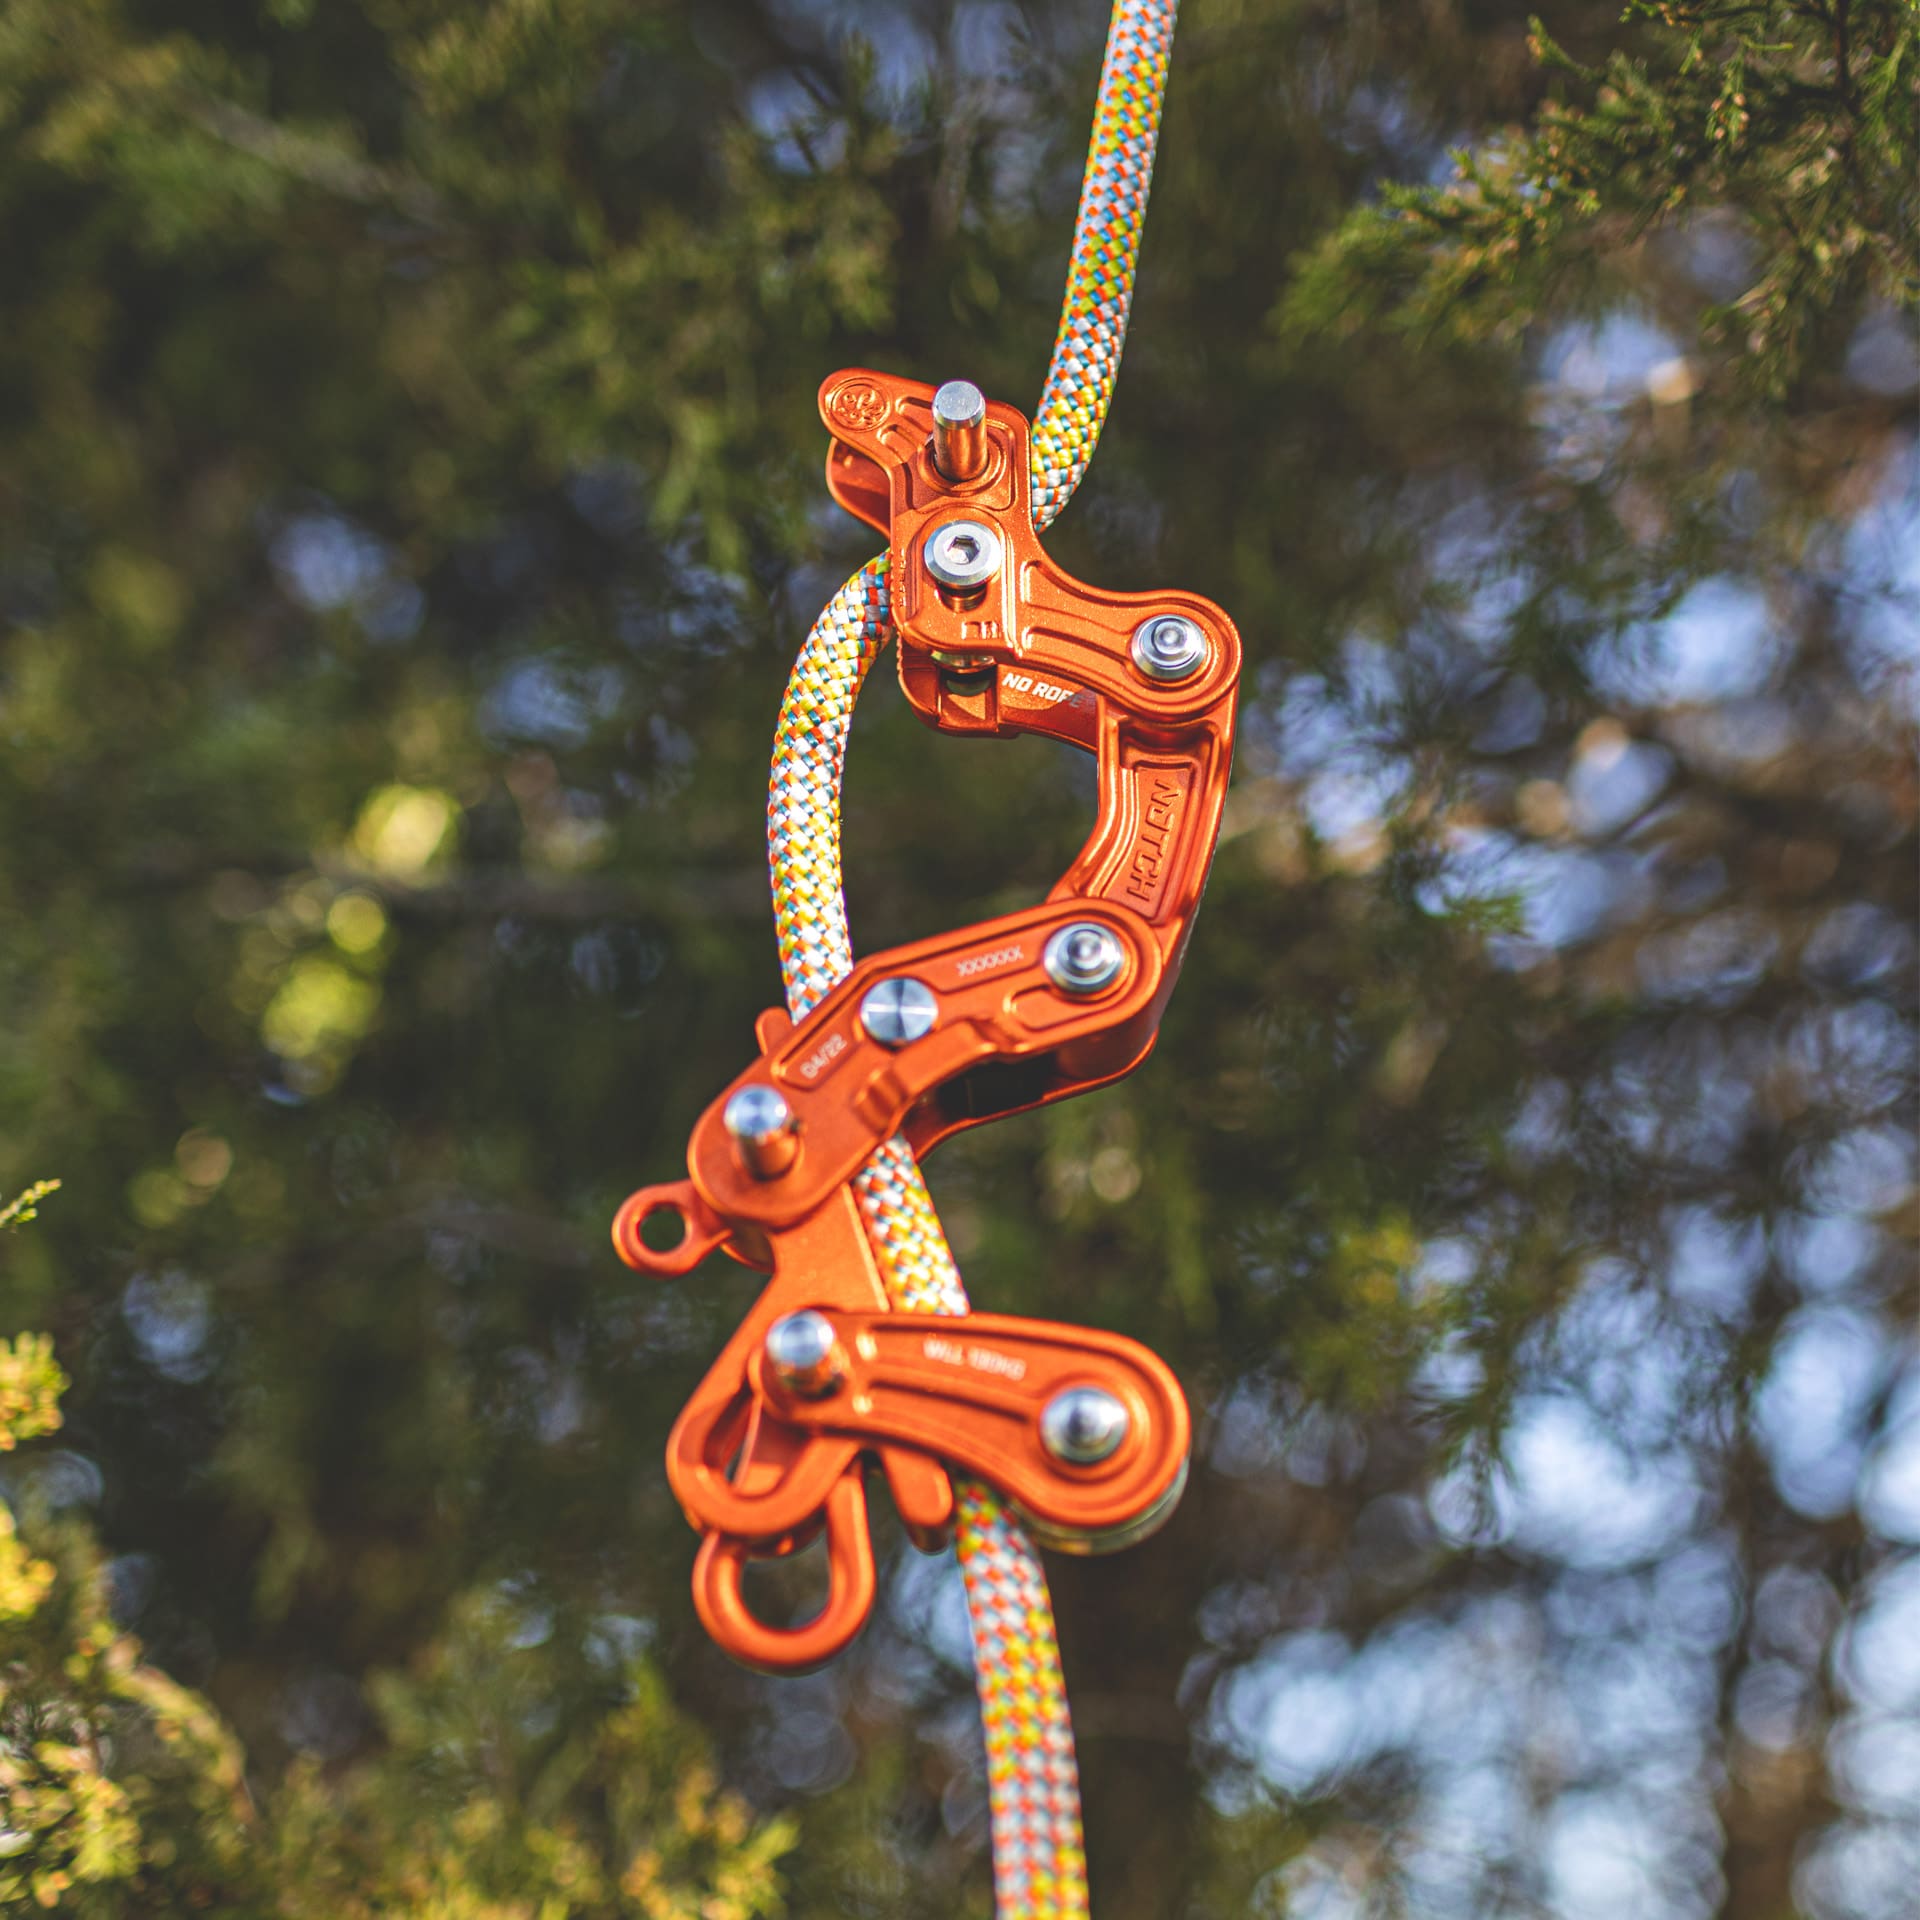 Notch Rope Runner Pro - Orange Limited Edition